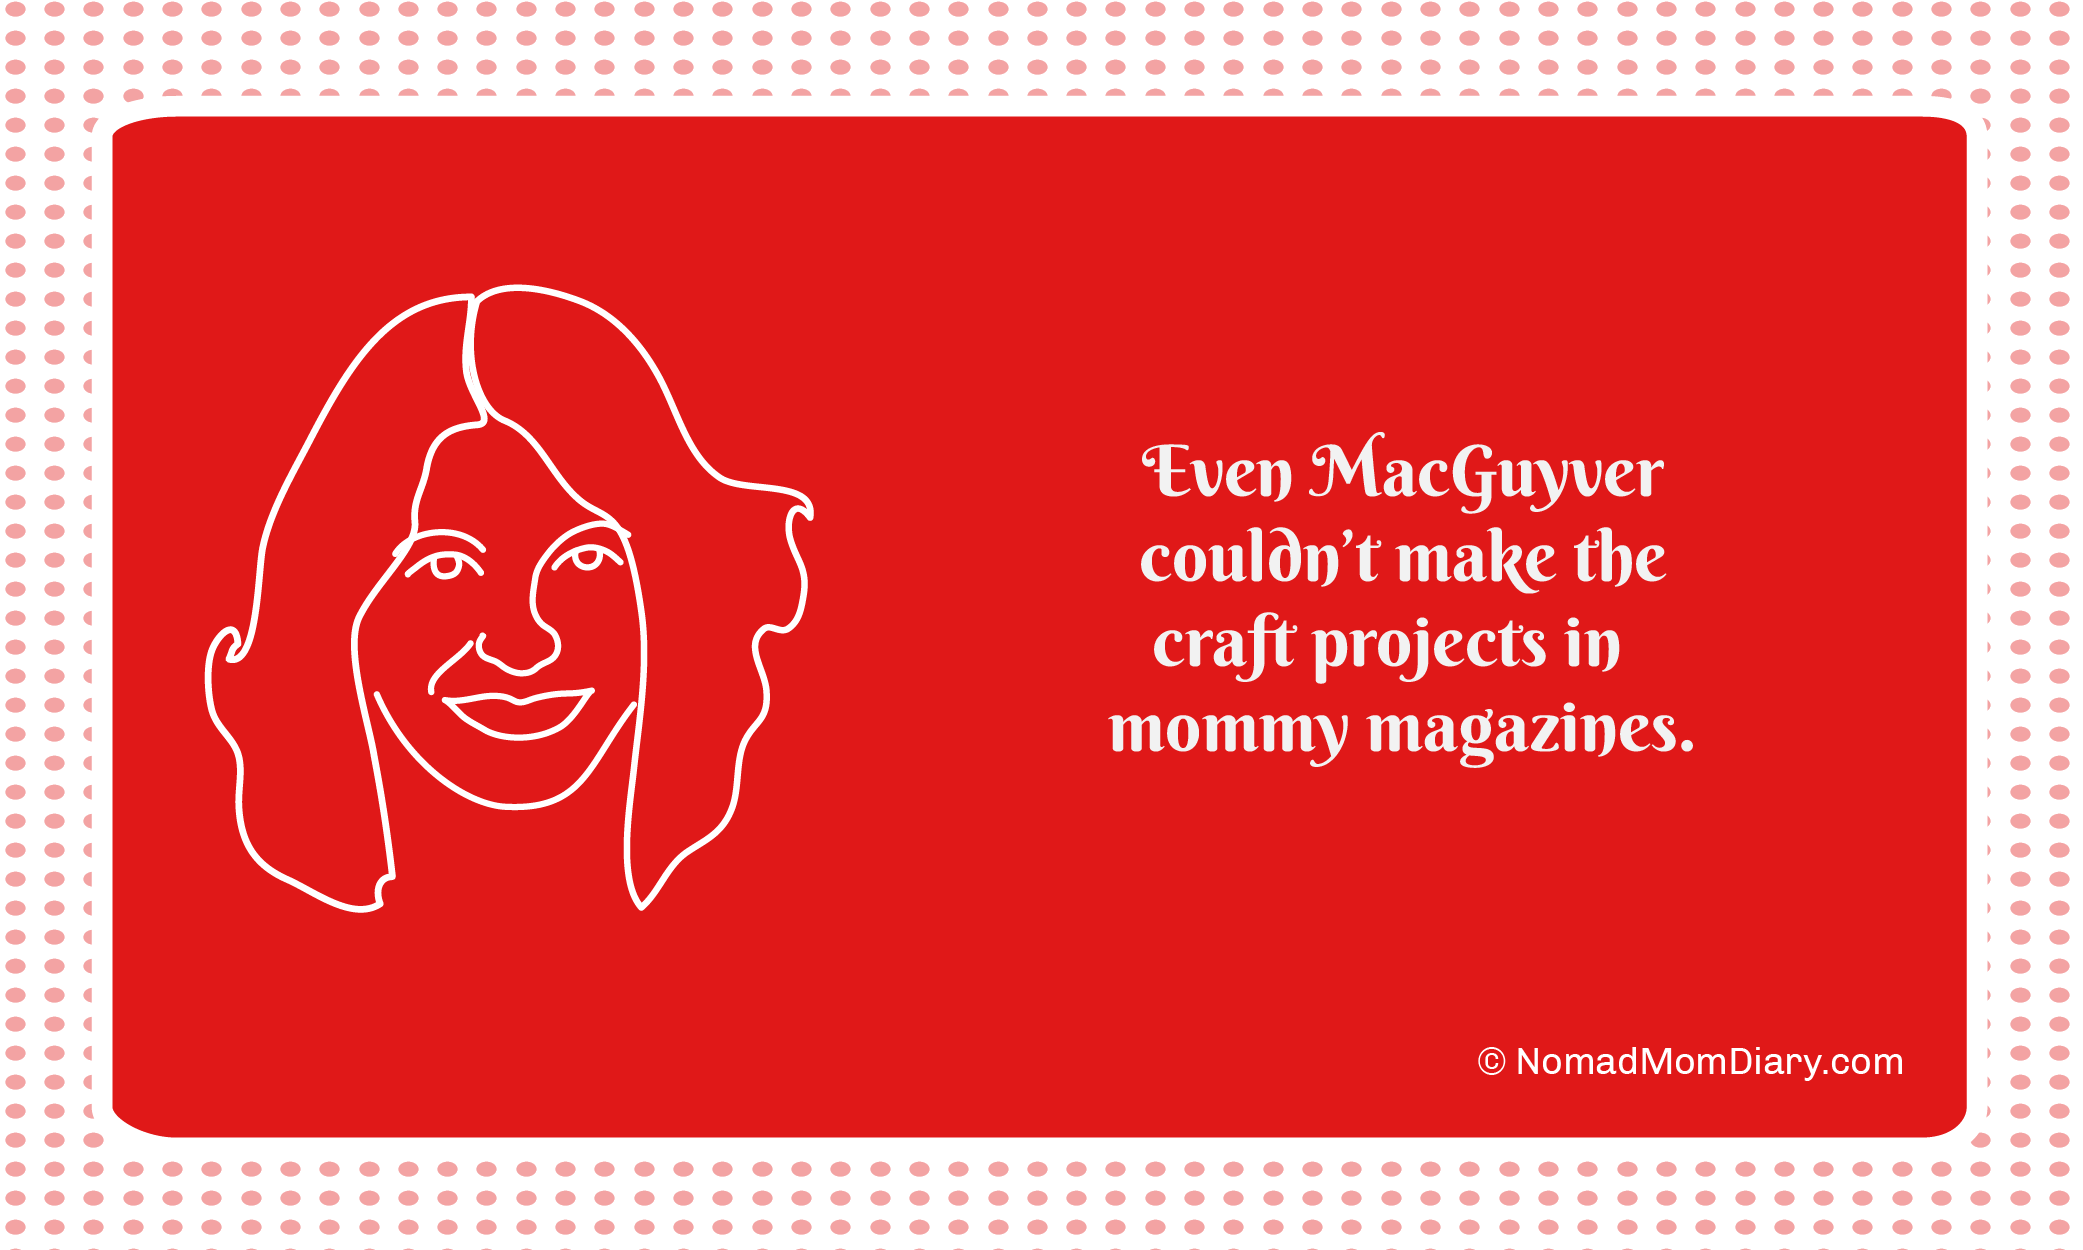 Even MacGuyver couldn't make the craft projects in mommy magazines